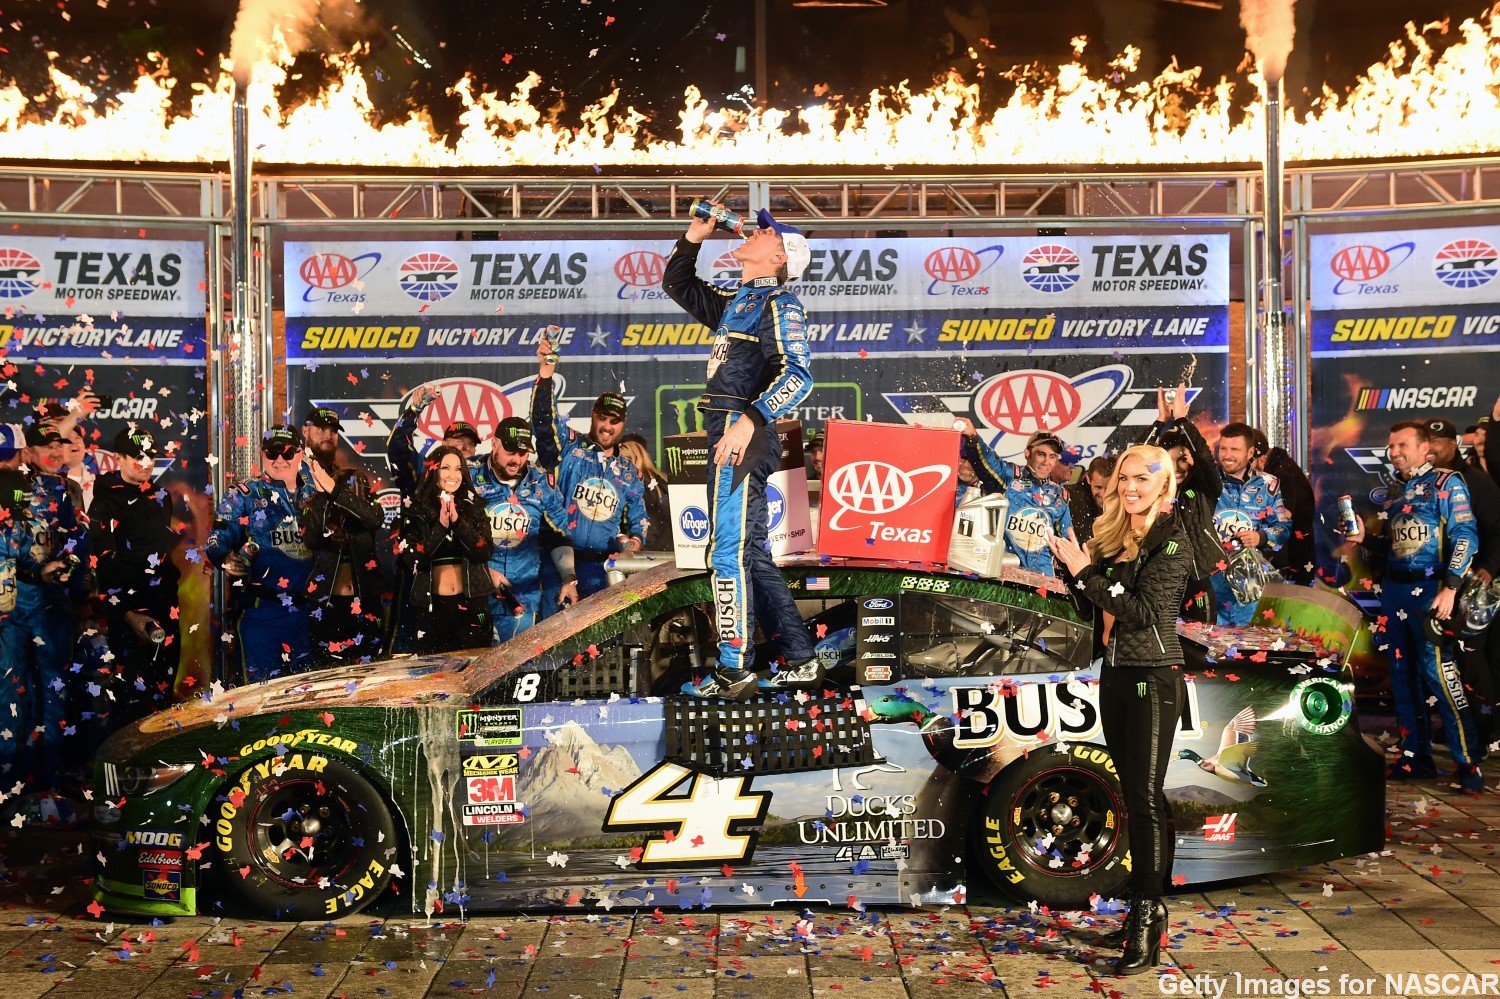 Kevin Harvick, driver of the #4 Busch Beer/Ducks Unlimited Ford, celebrates in Victory Lane after winning the Monster Energy NASCAR Cup Series AAA Texas 500 